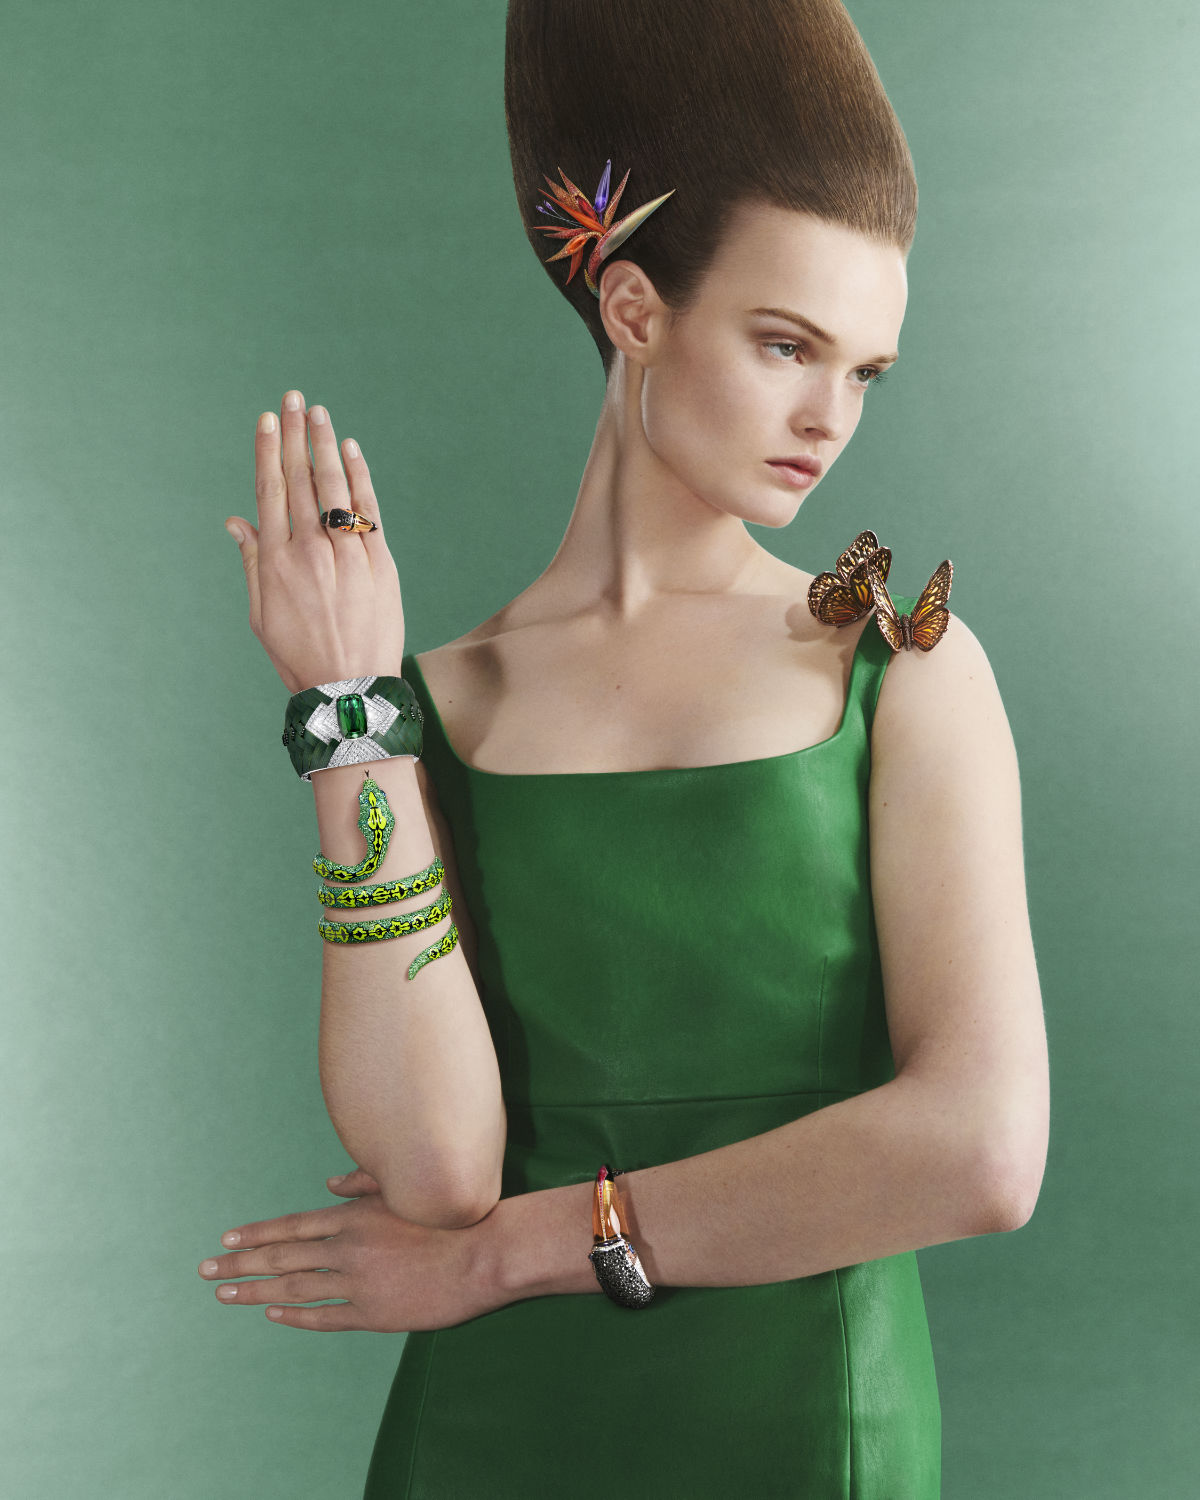 Boucheron Presents Its New High Jewelry Carte Blanche: Ailleurs